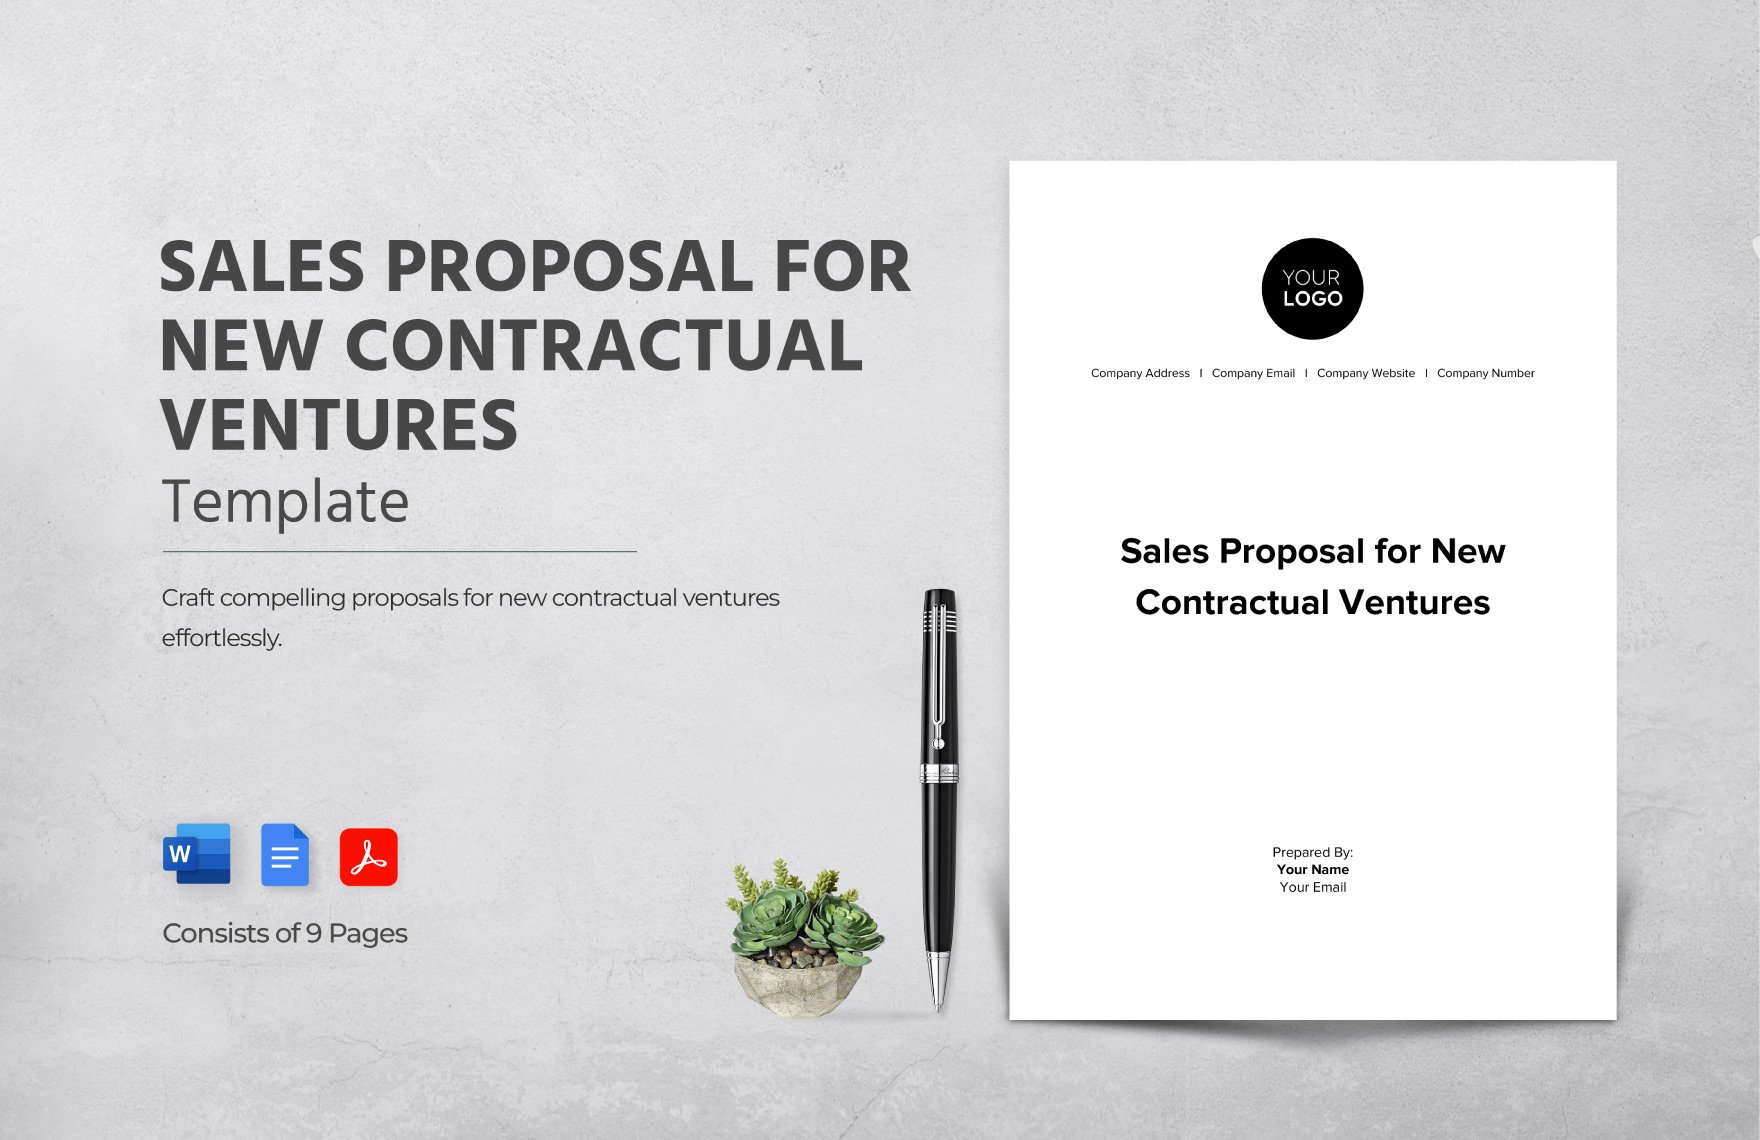 Sales Proposal for New Contractual Ventures Template